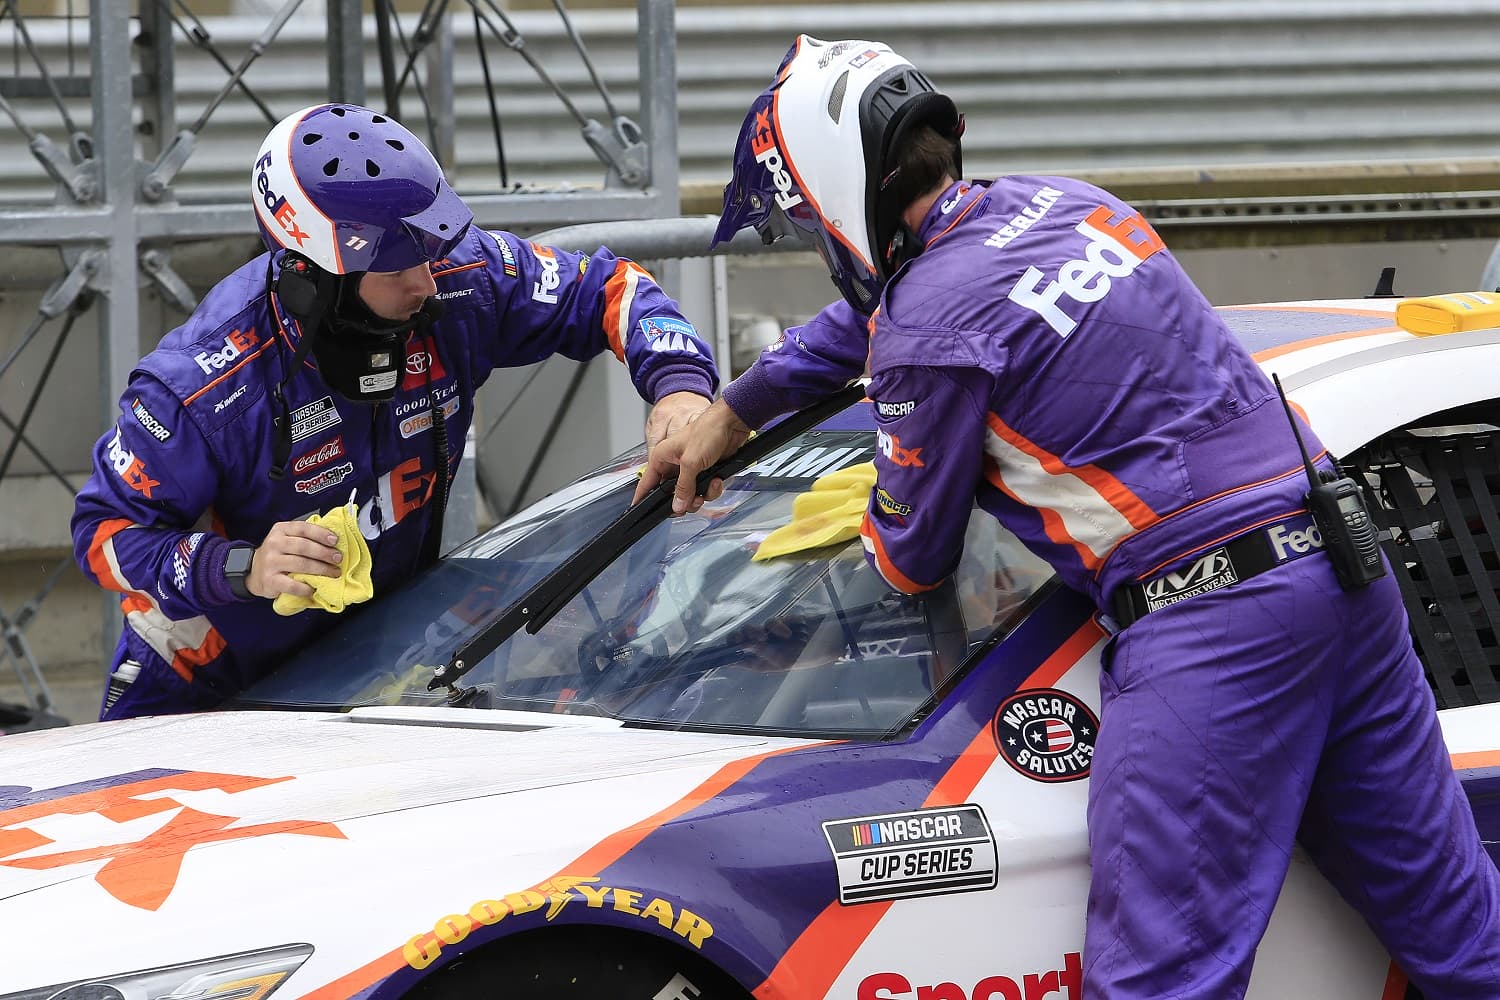 Crew members for Denny Hamlin's Toyota wipe the windshield down with RainX during the inaugural EchoPark Automotive Texas Grand Prix NASCAR Cup Series race on May 23, 2021, at Circuit of America in Austin, Texas.